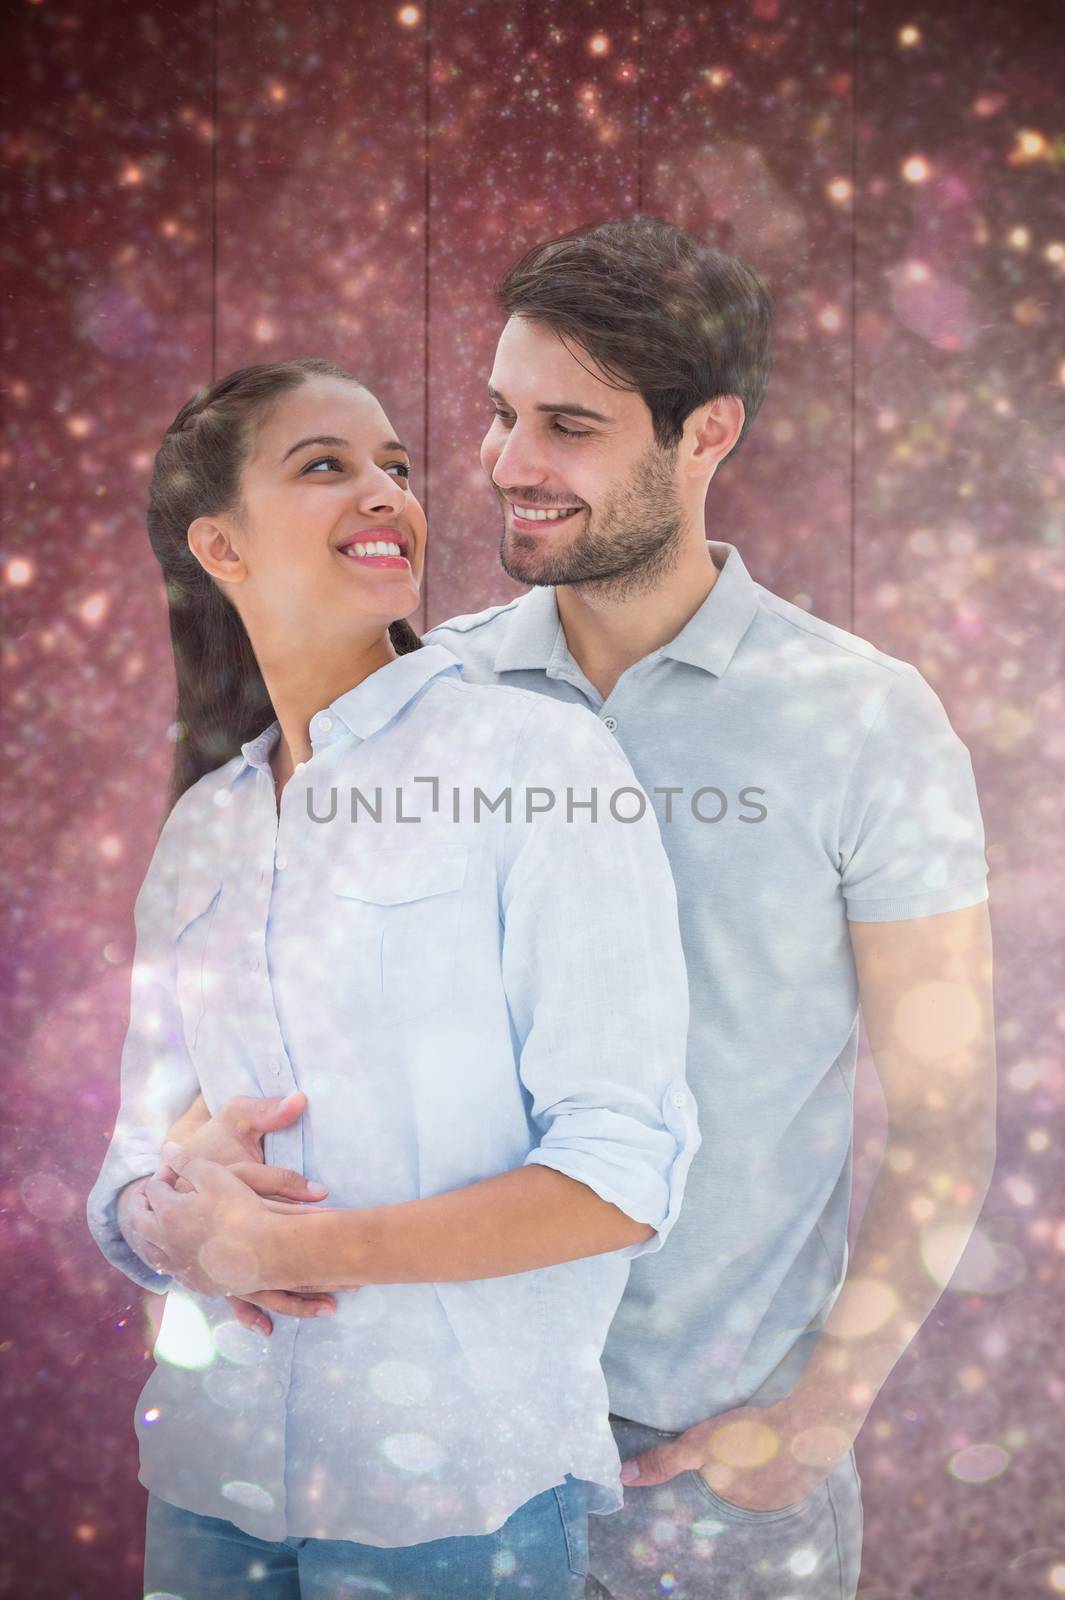 Cute couple embracing and smiling at each other against white snow and stars on black